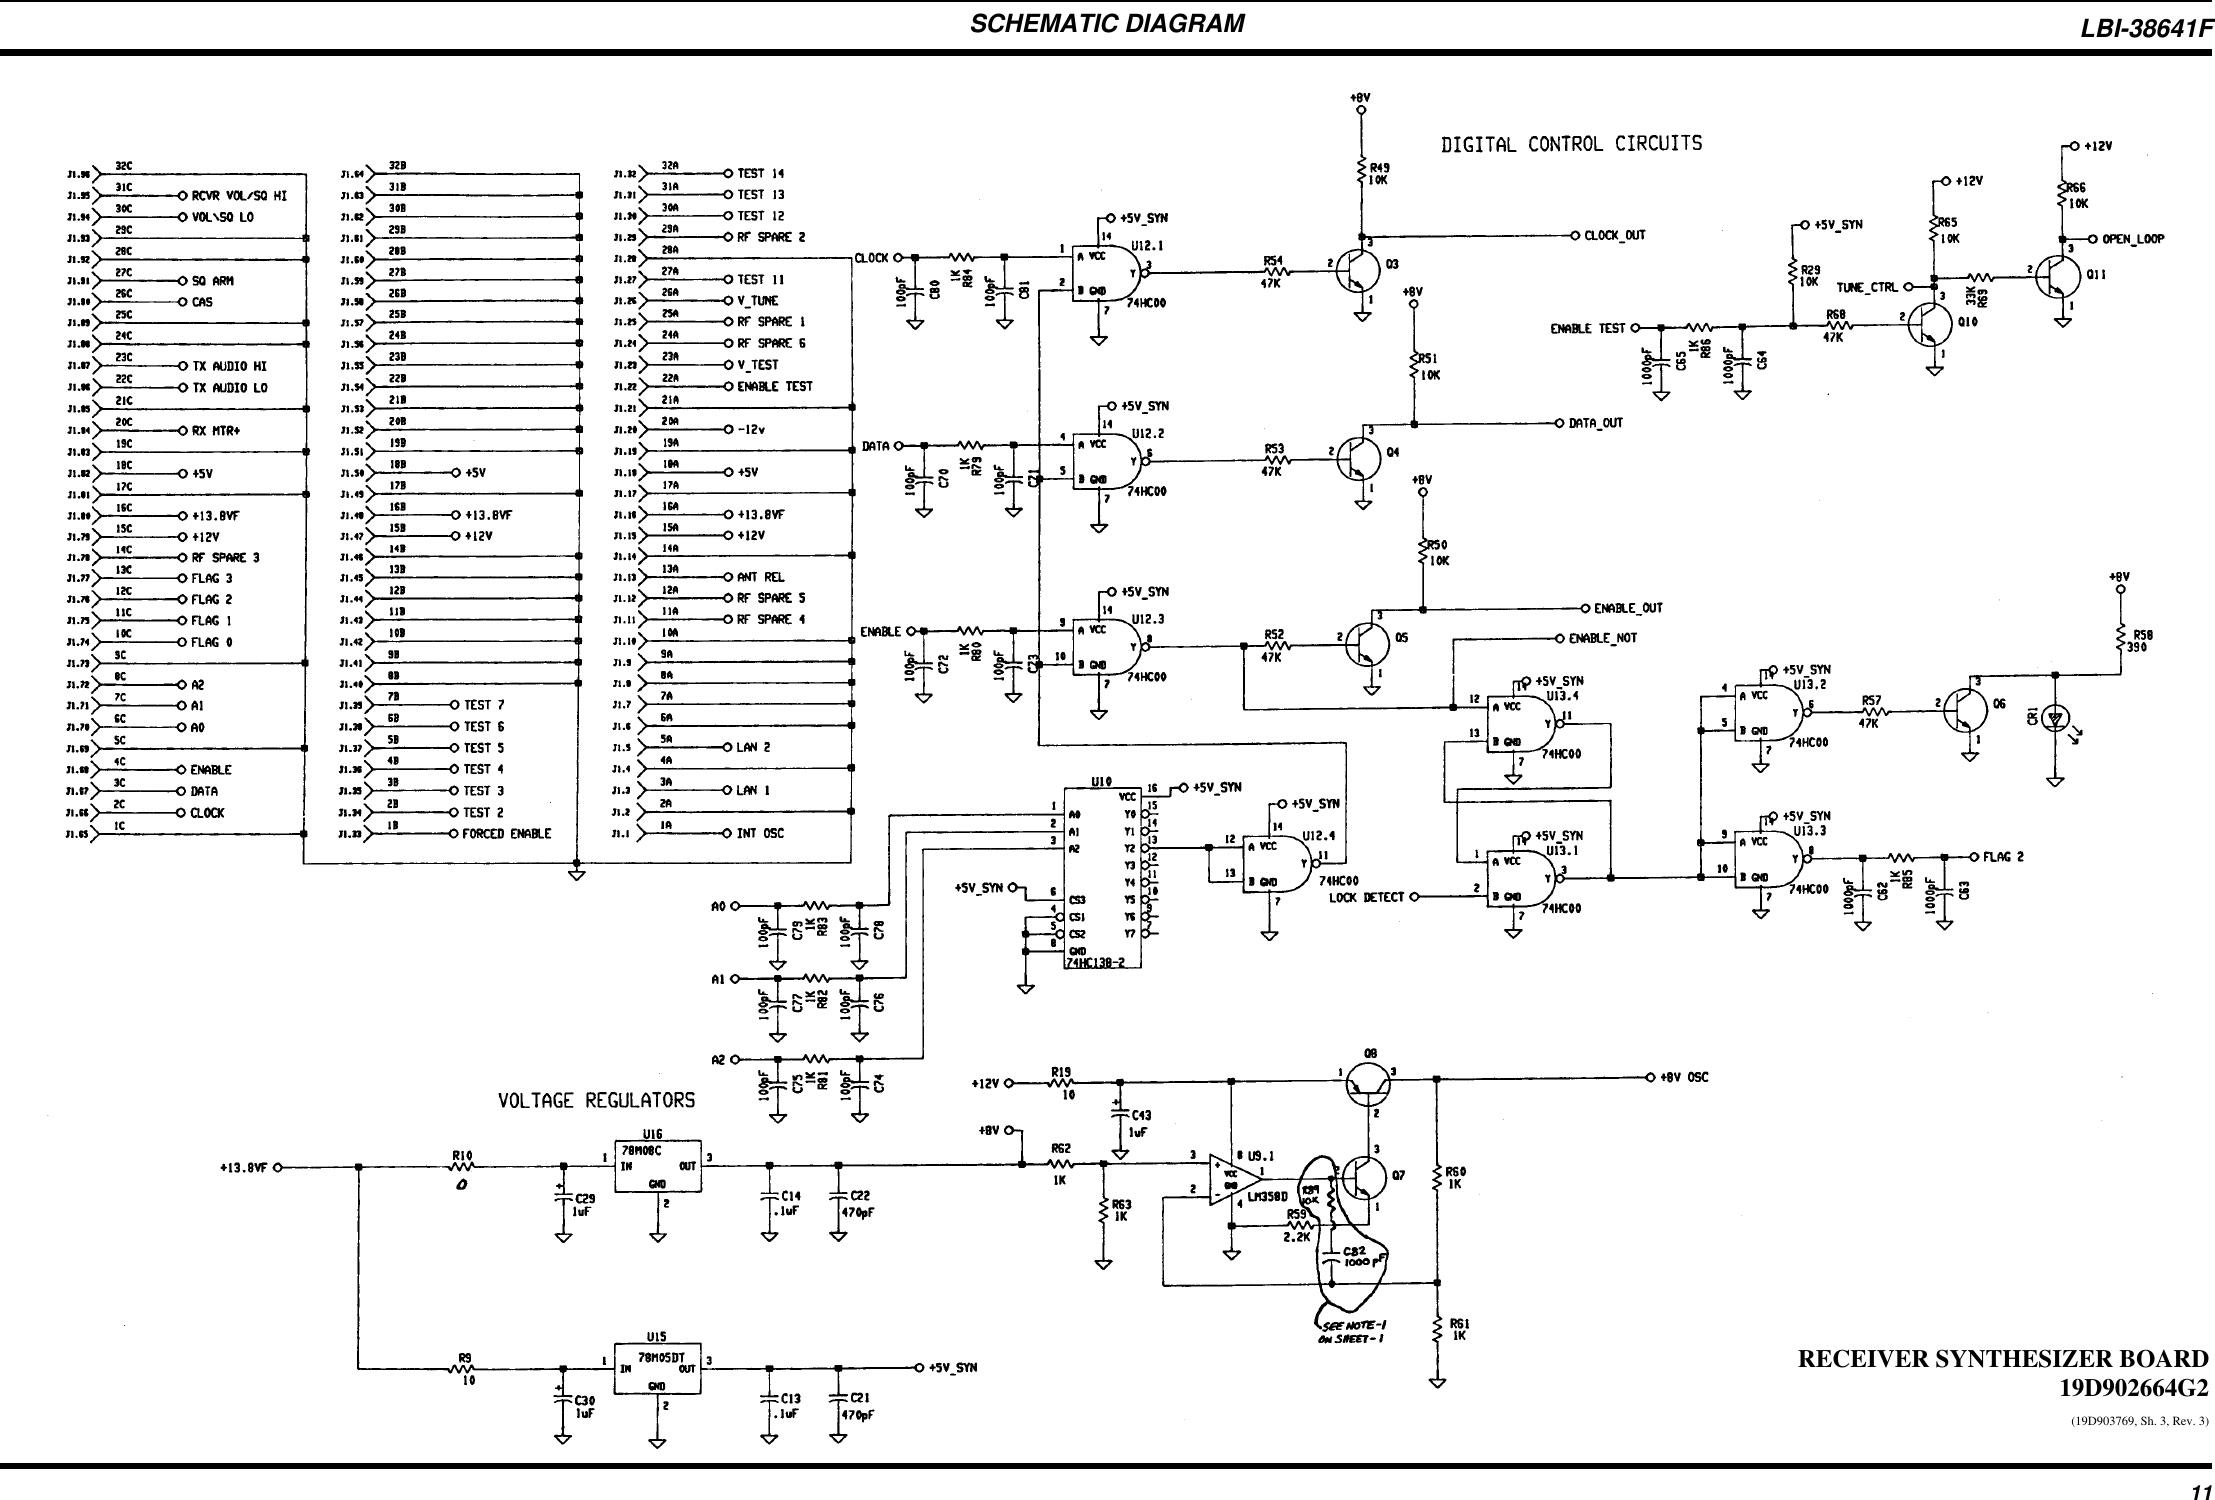 SCHEMATIC DIAGRAMRECEIVER SYNTHESIZER BOARD19D902664G2(19D903769, Sh. 3, Rev. 3)LBI-38641F11